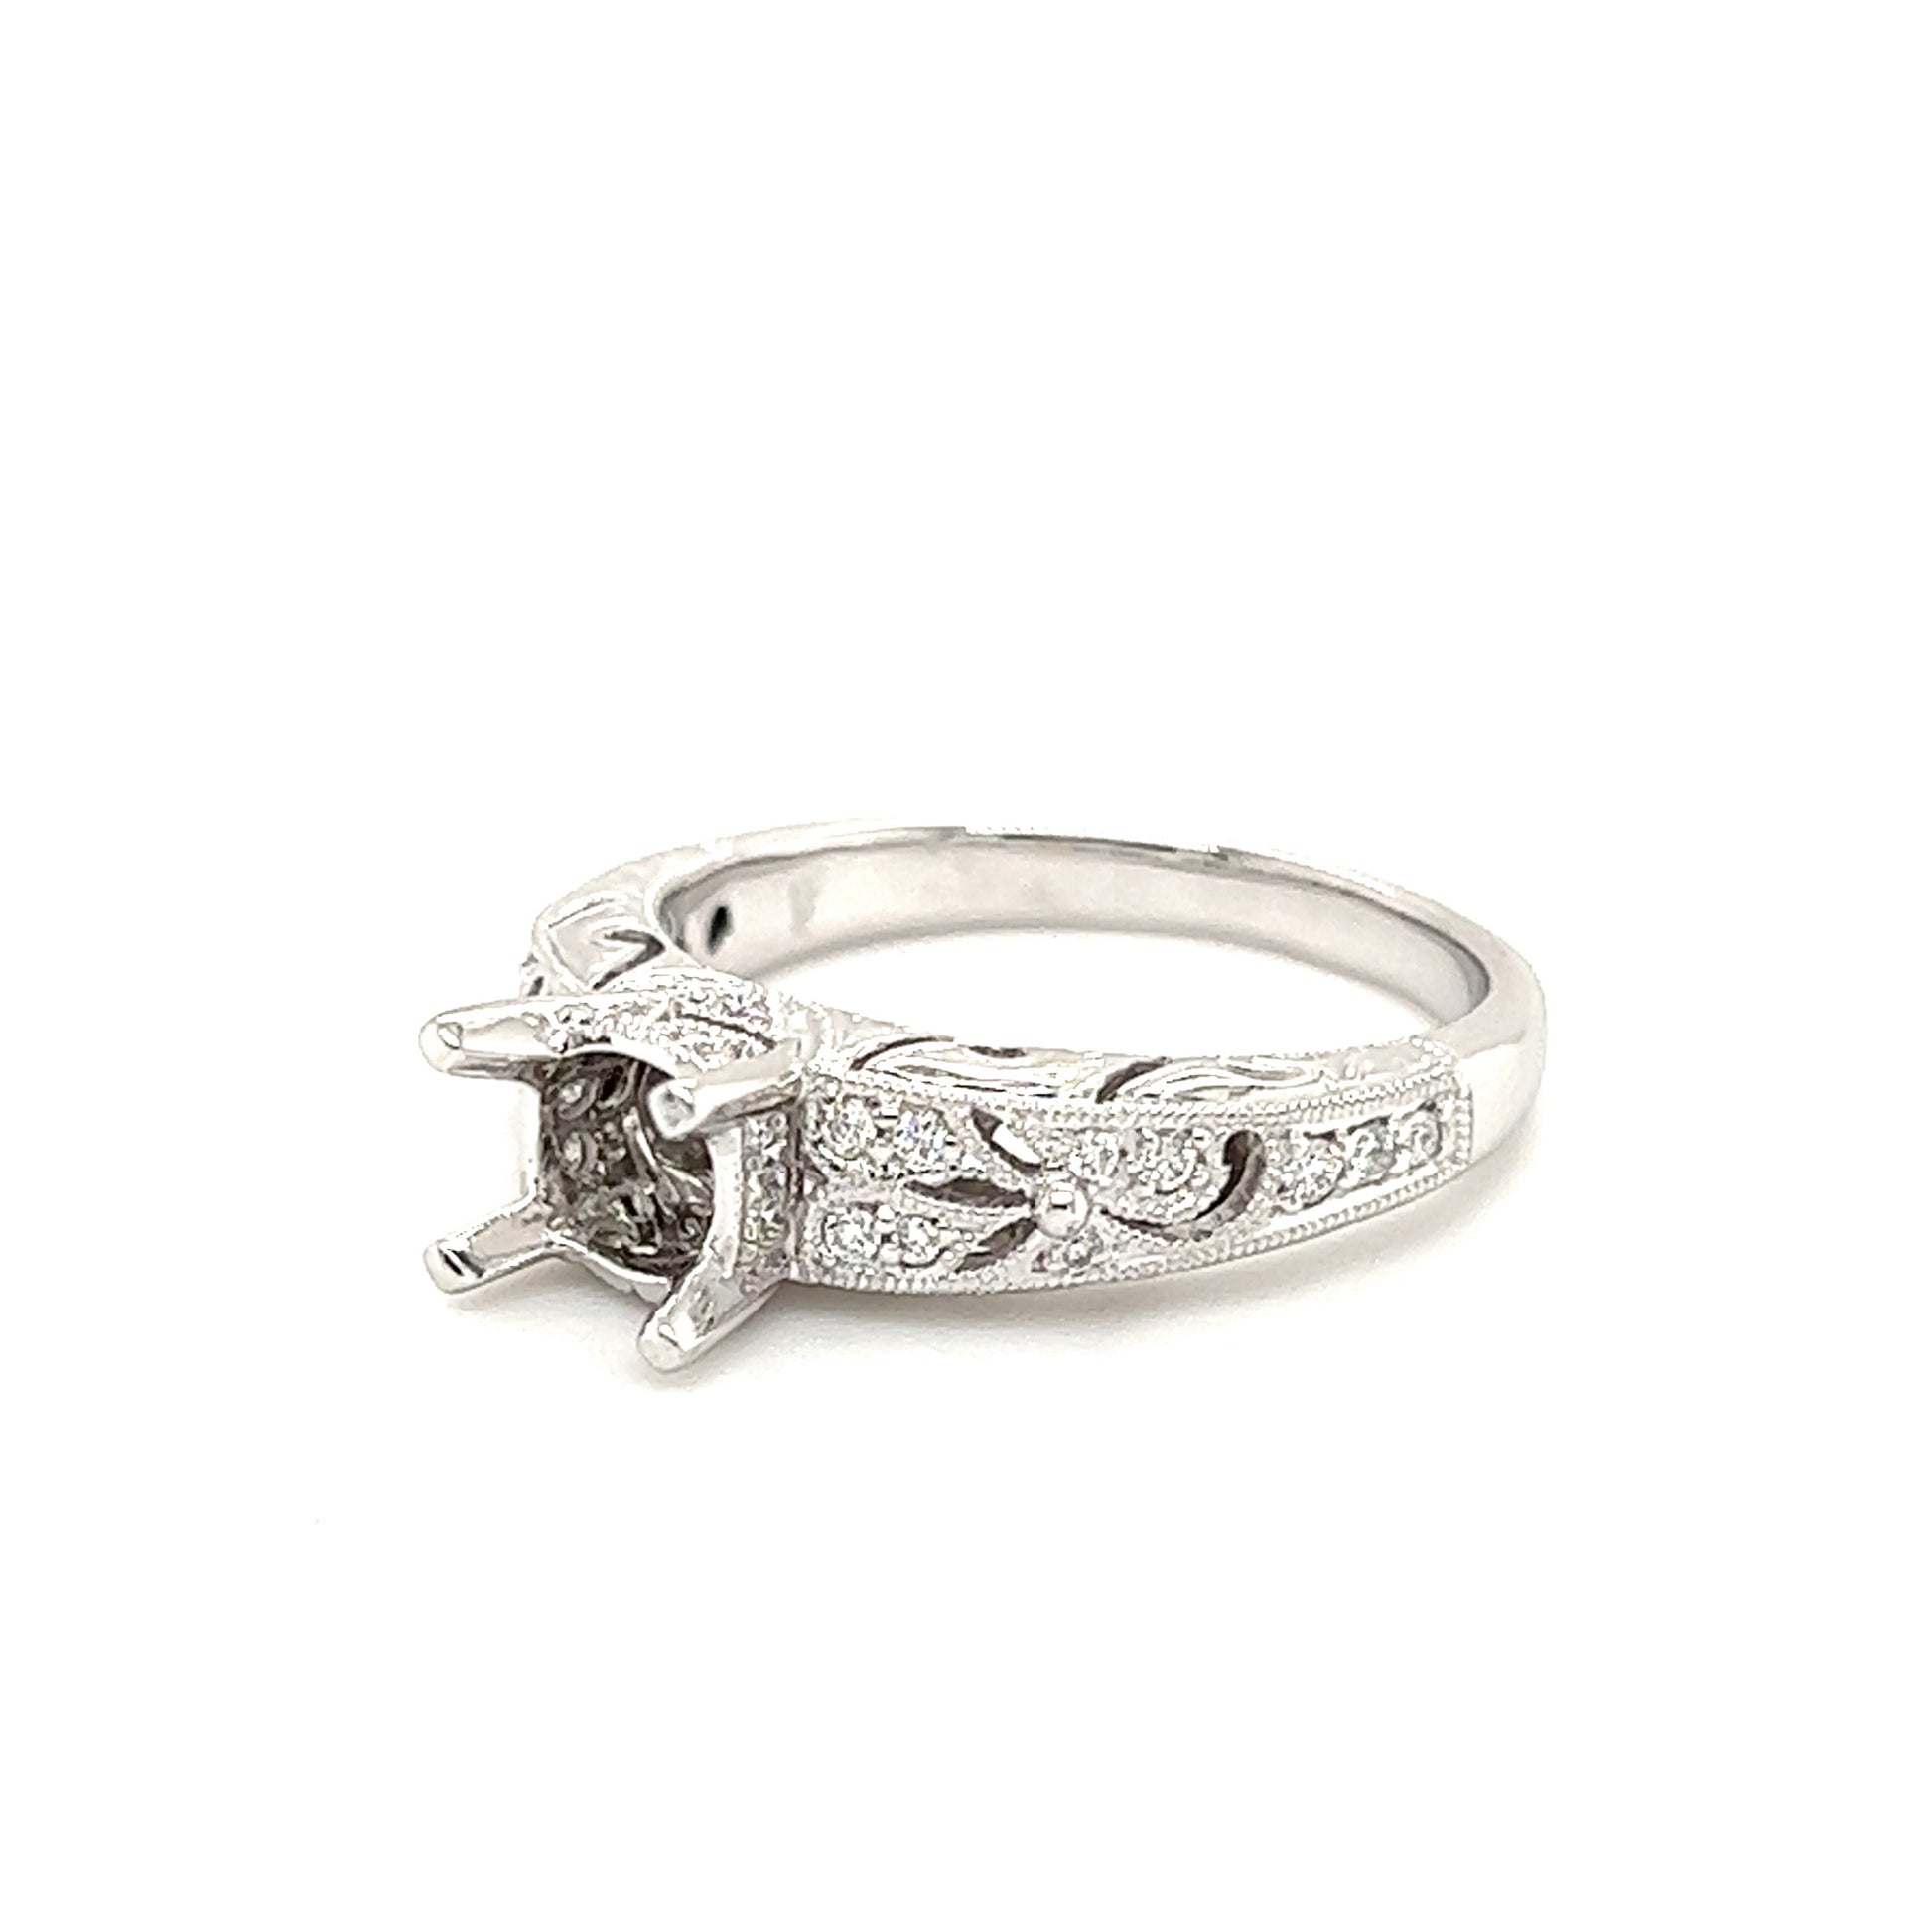 Filigree Engraved Diamond Ring Setting with Twenty-Eight in 14K White Gold Right Side View